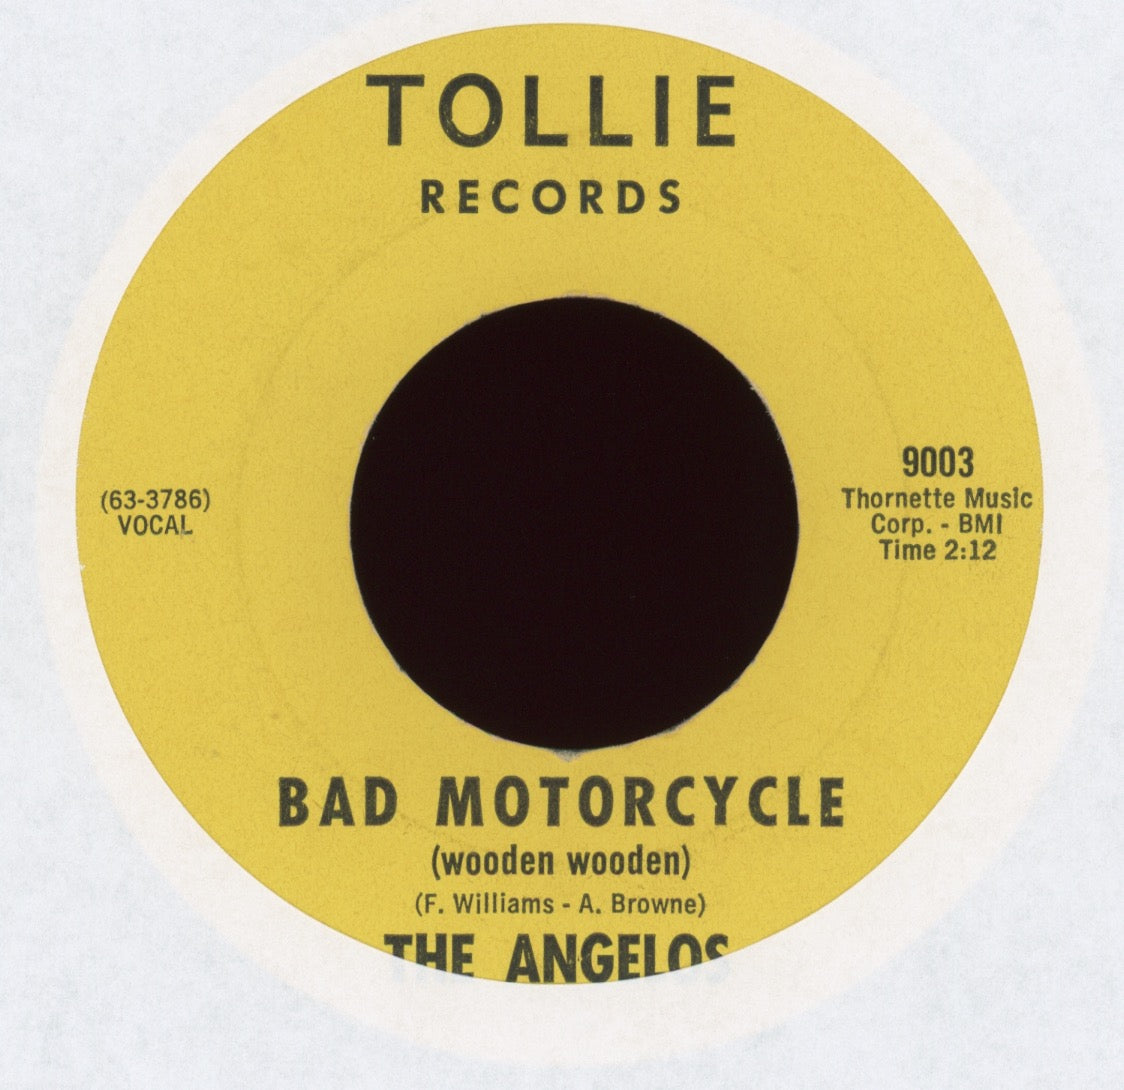 The Angelos - Bad Motorcycle (Wooden Wooden) on Tollie